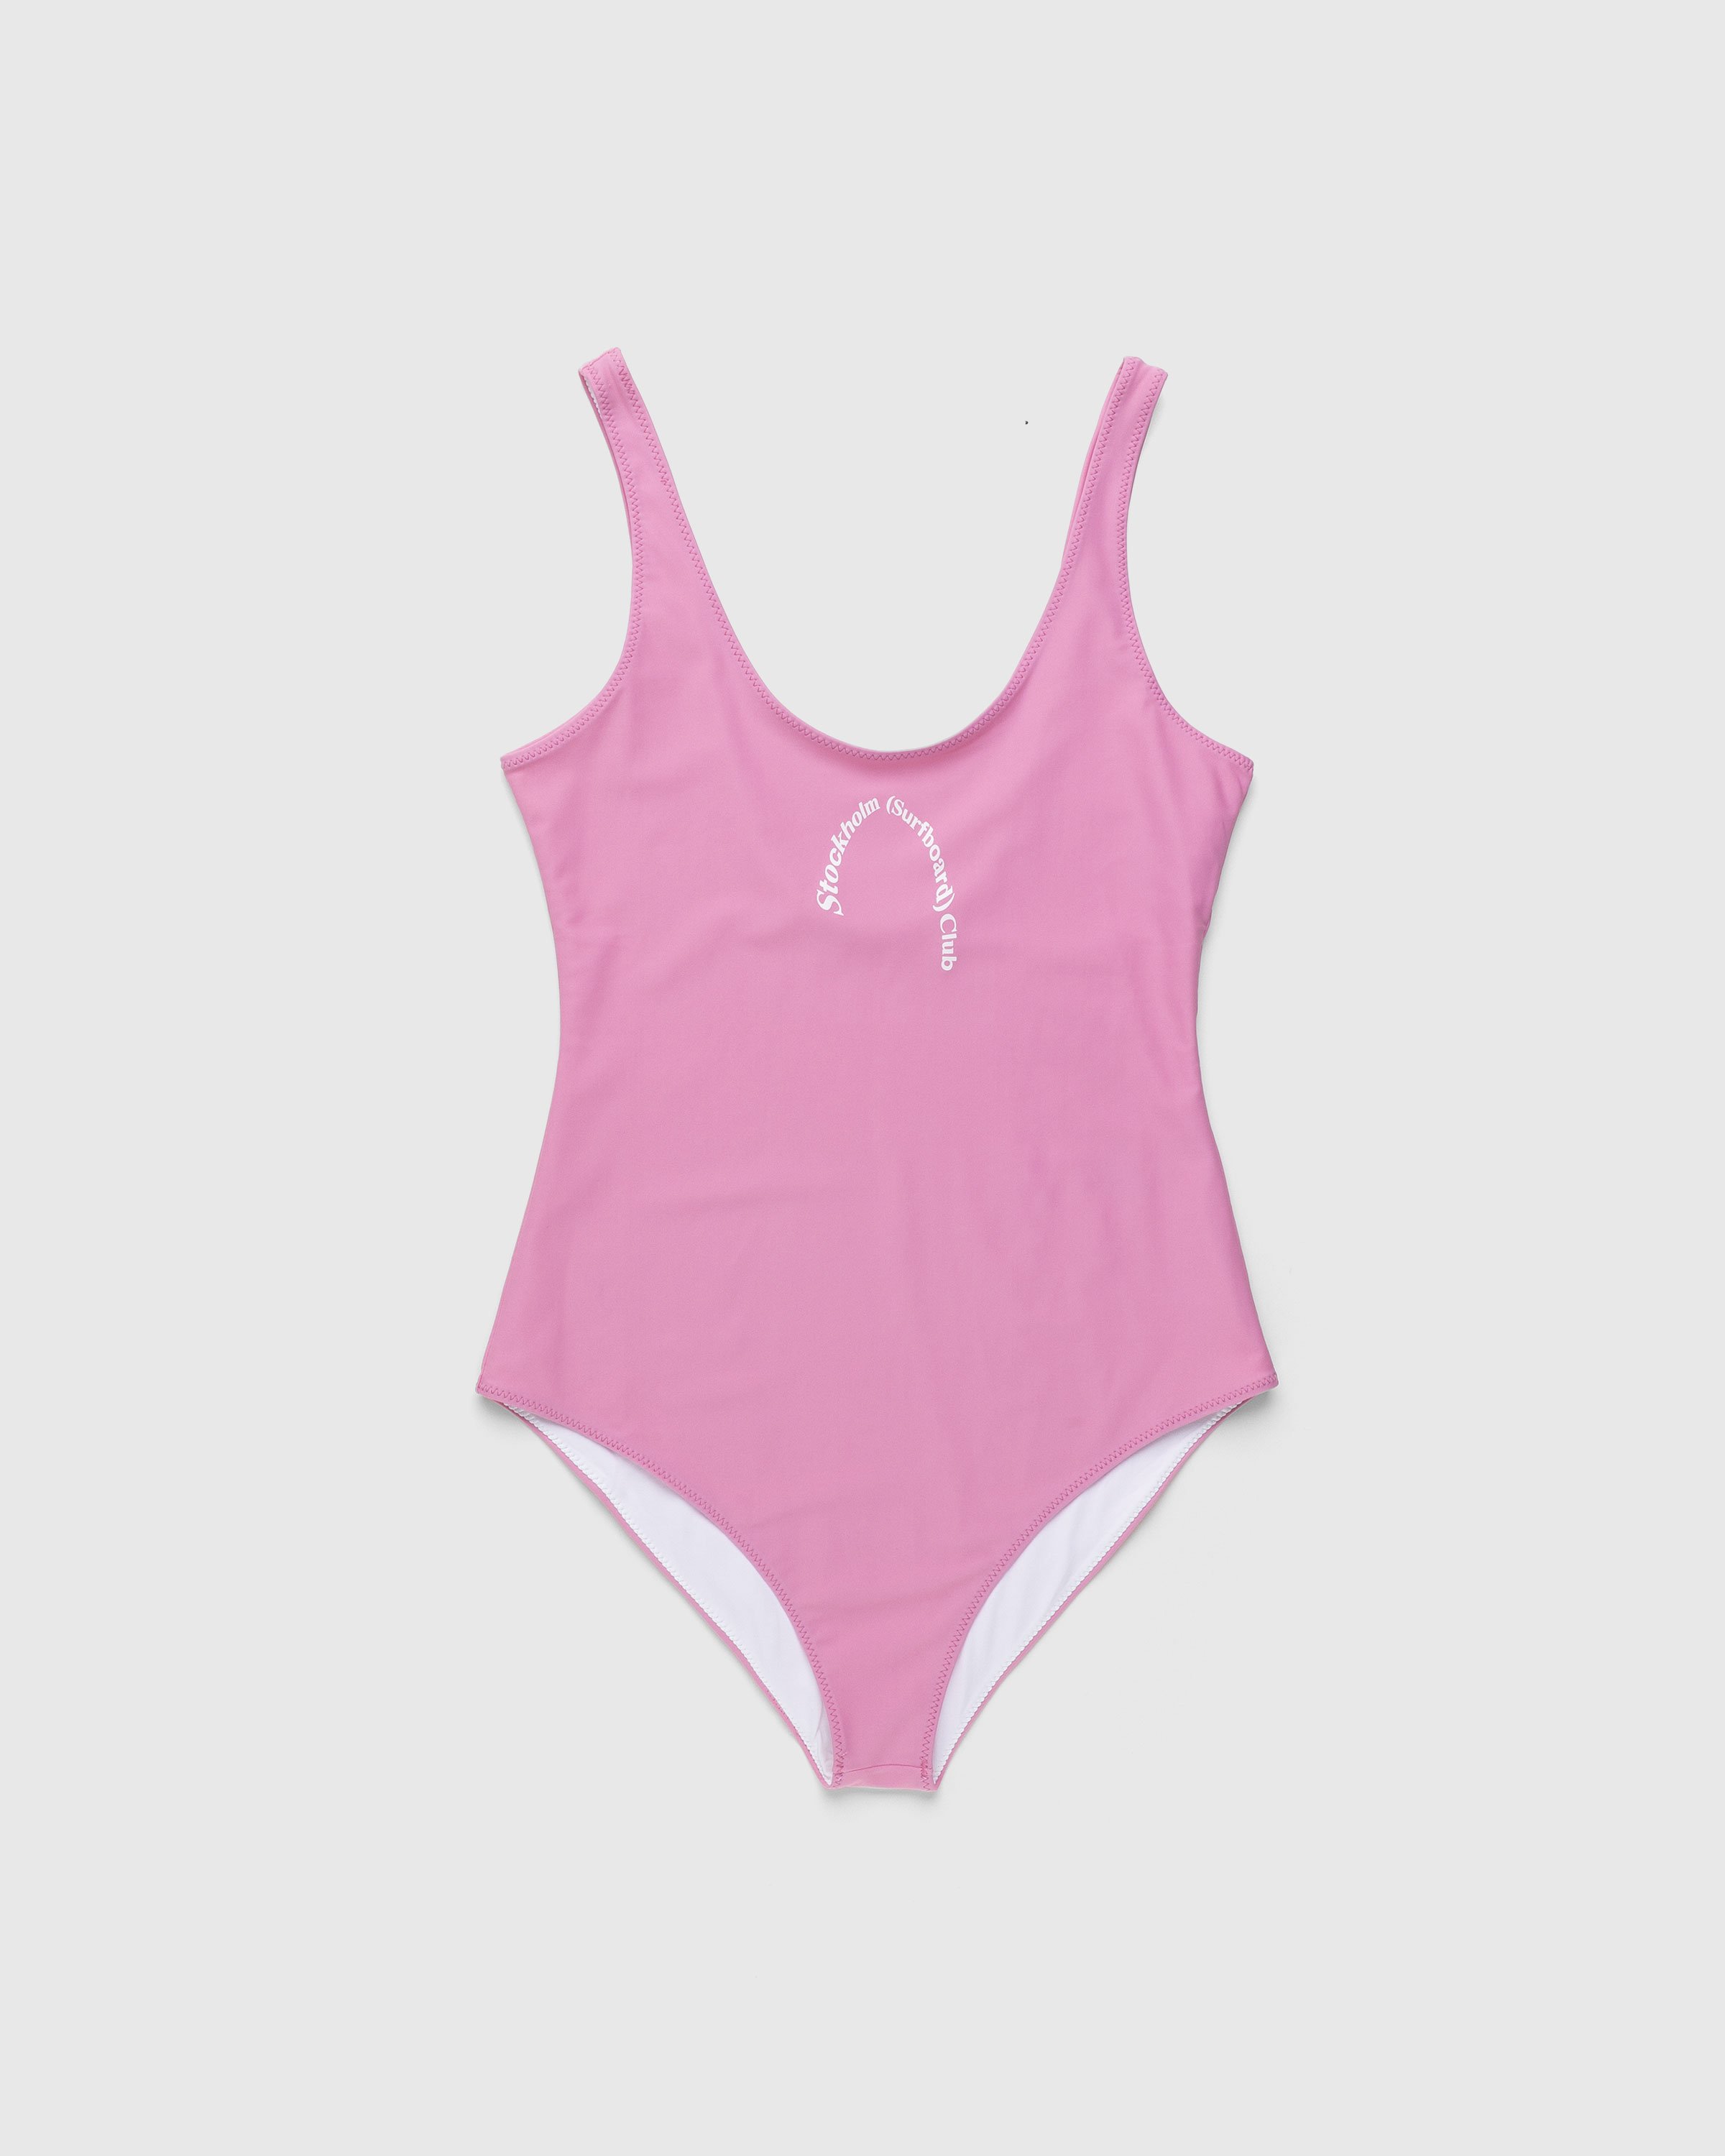 Stockholm Surfboard Club - Swimsuit Pink - Clothing - Multi - Image 1